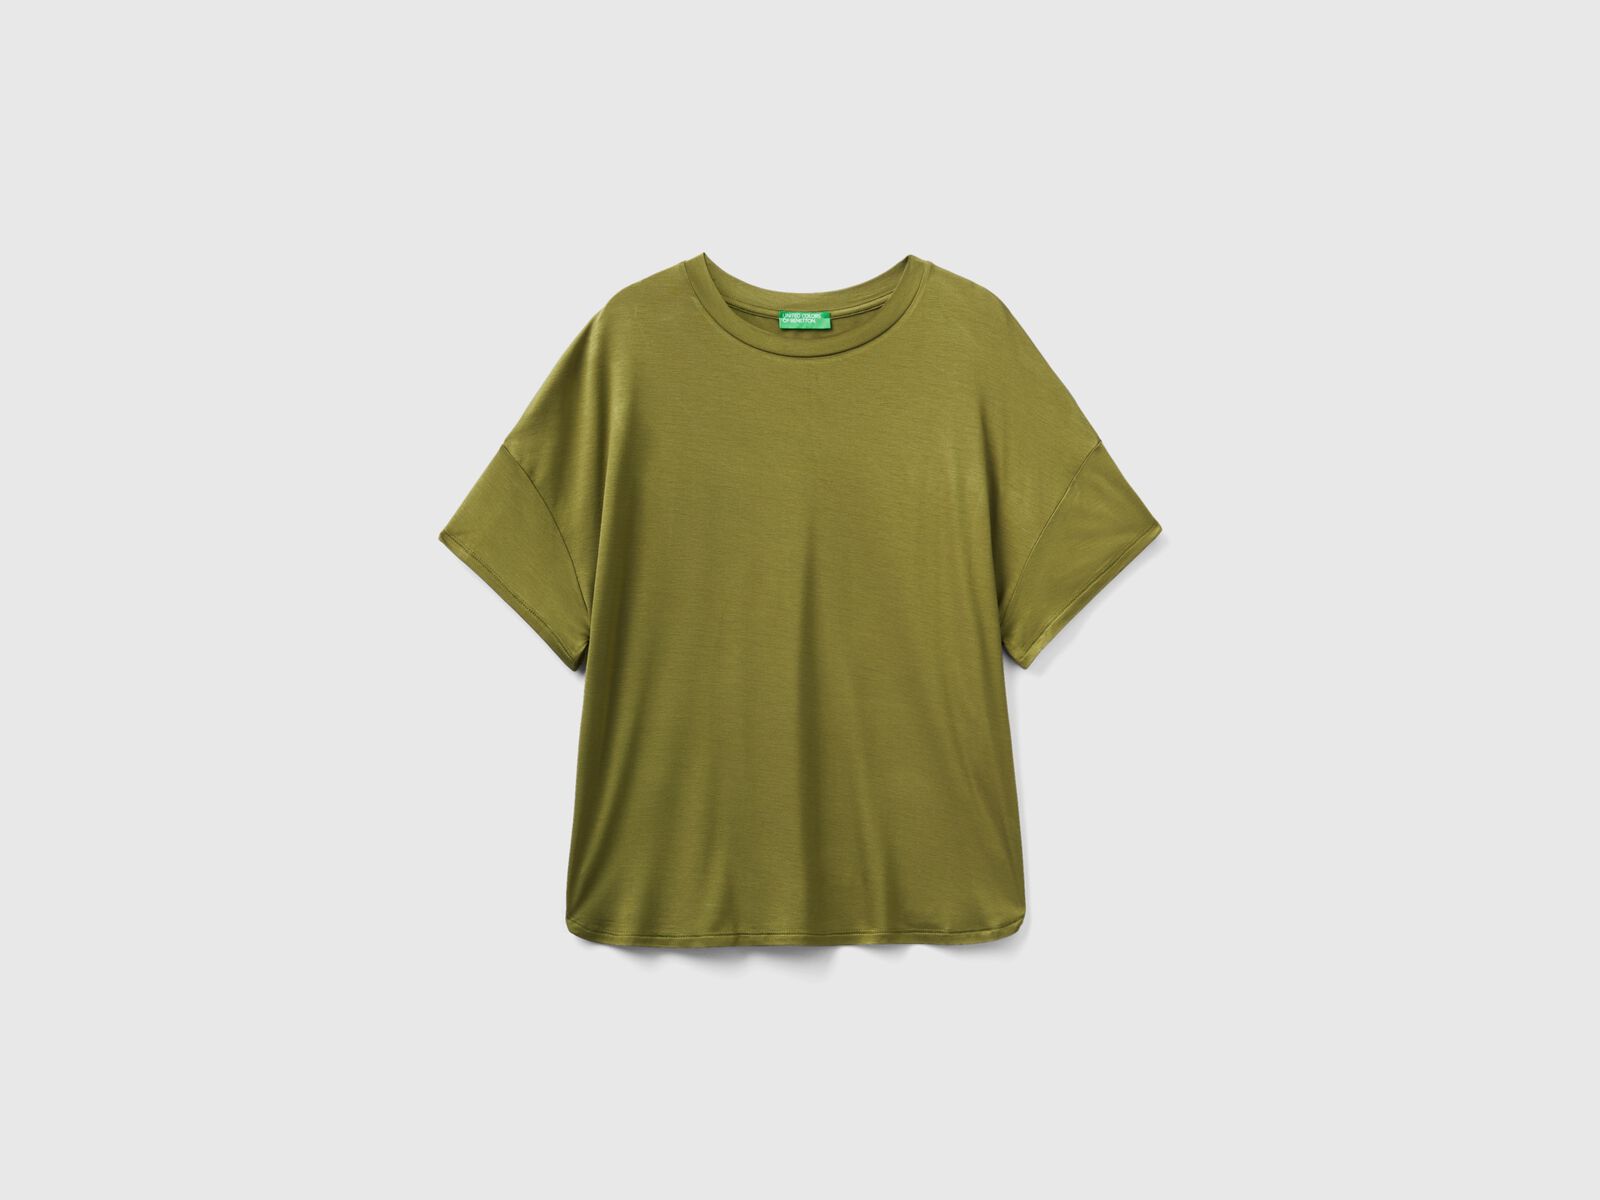 T-shirt in sustainable stretch viscose - Military Green | Benetton